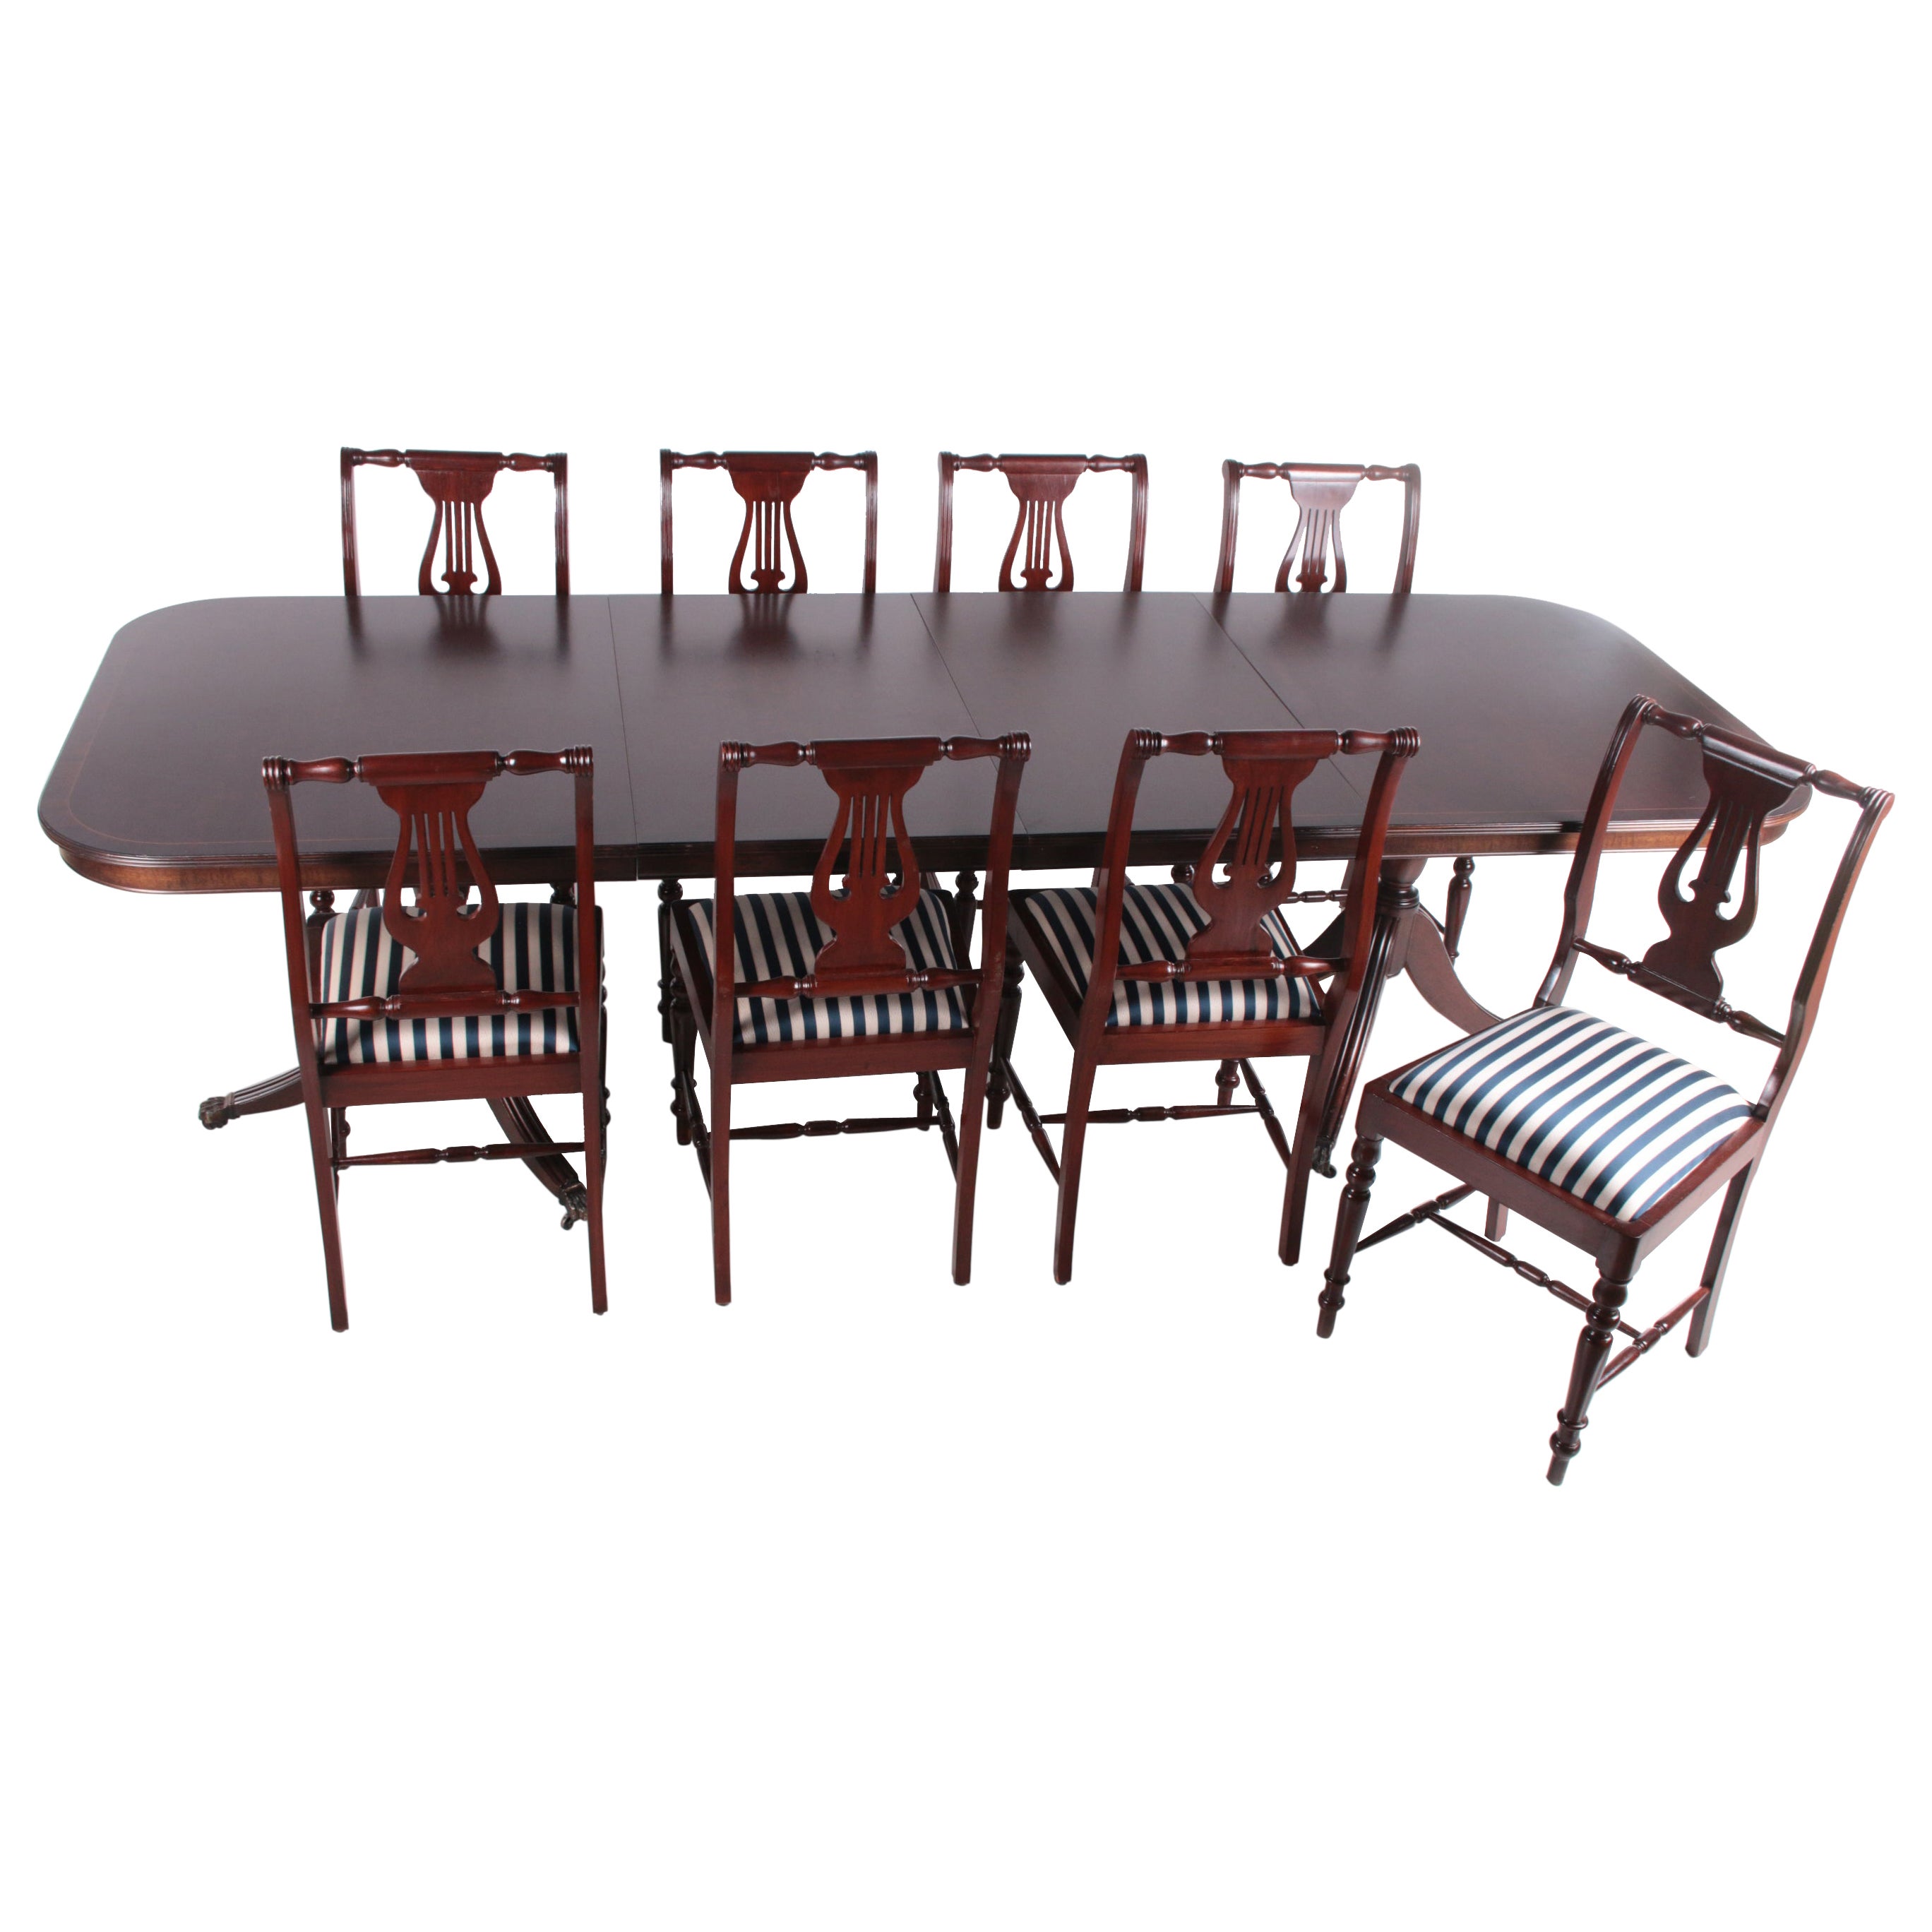 Queen Anne Style English Mahogany Dining Set with 8 Chairs, 1980s